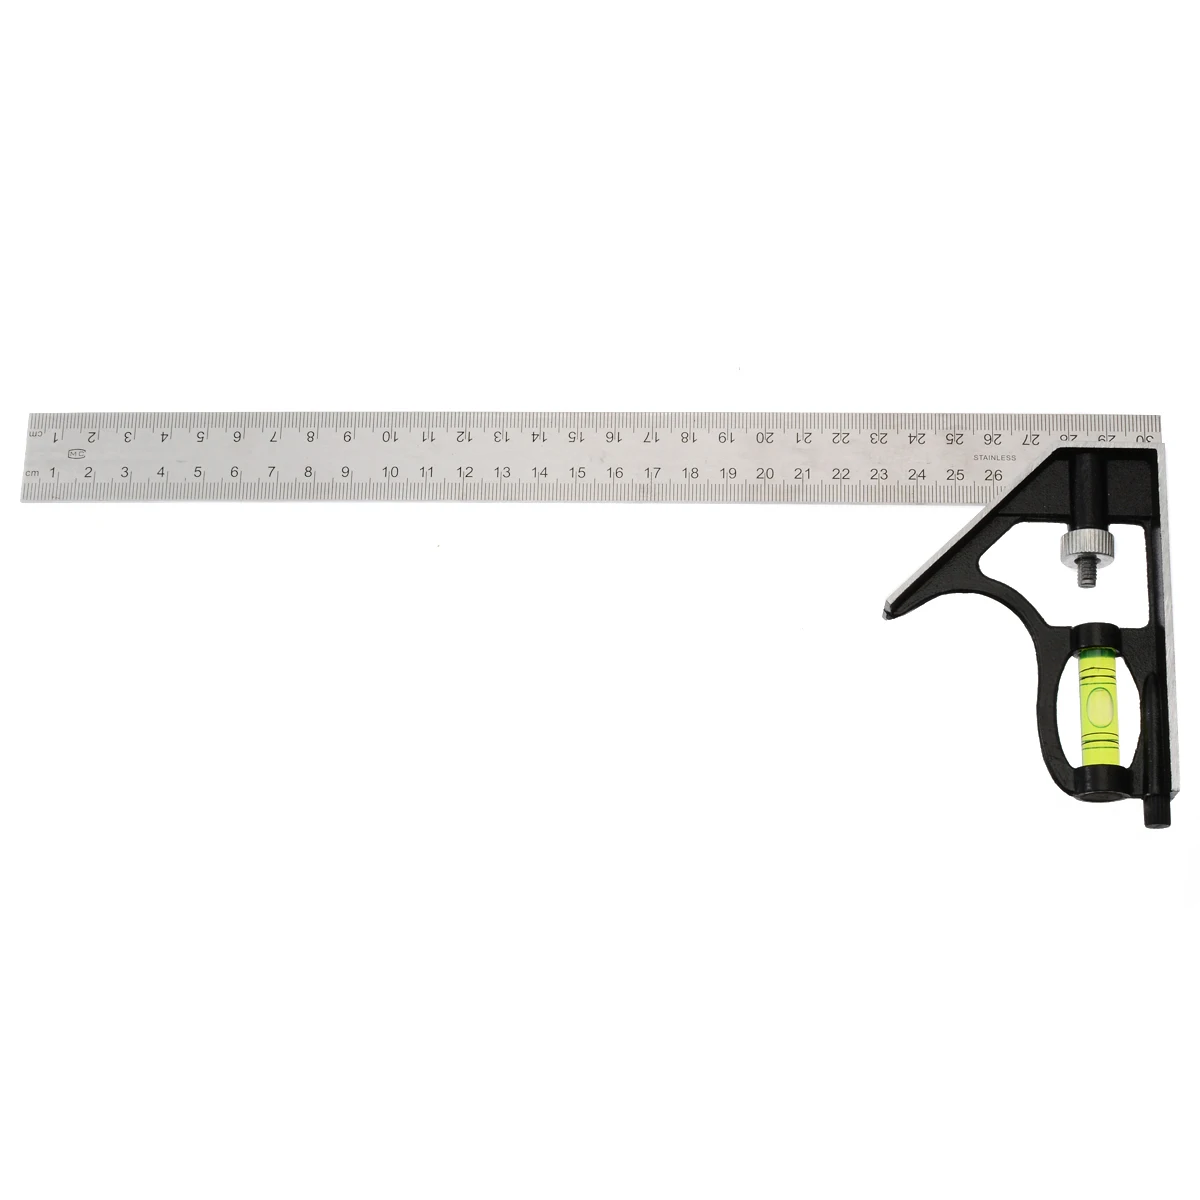 

Mayitr 1pc 300mm 12" Adjustable Engineers Combination Try Square Set Right Angle Ruler Measuring Tools Stainless Steel